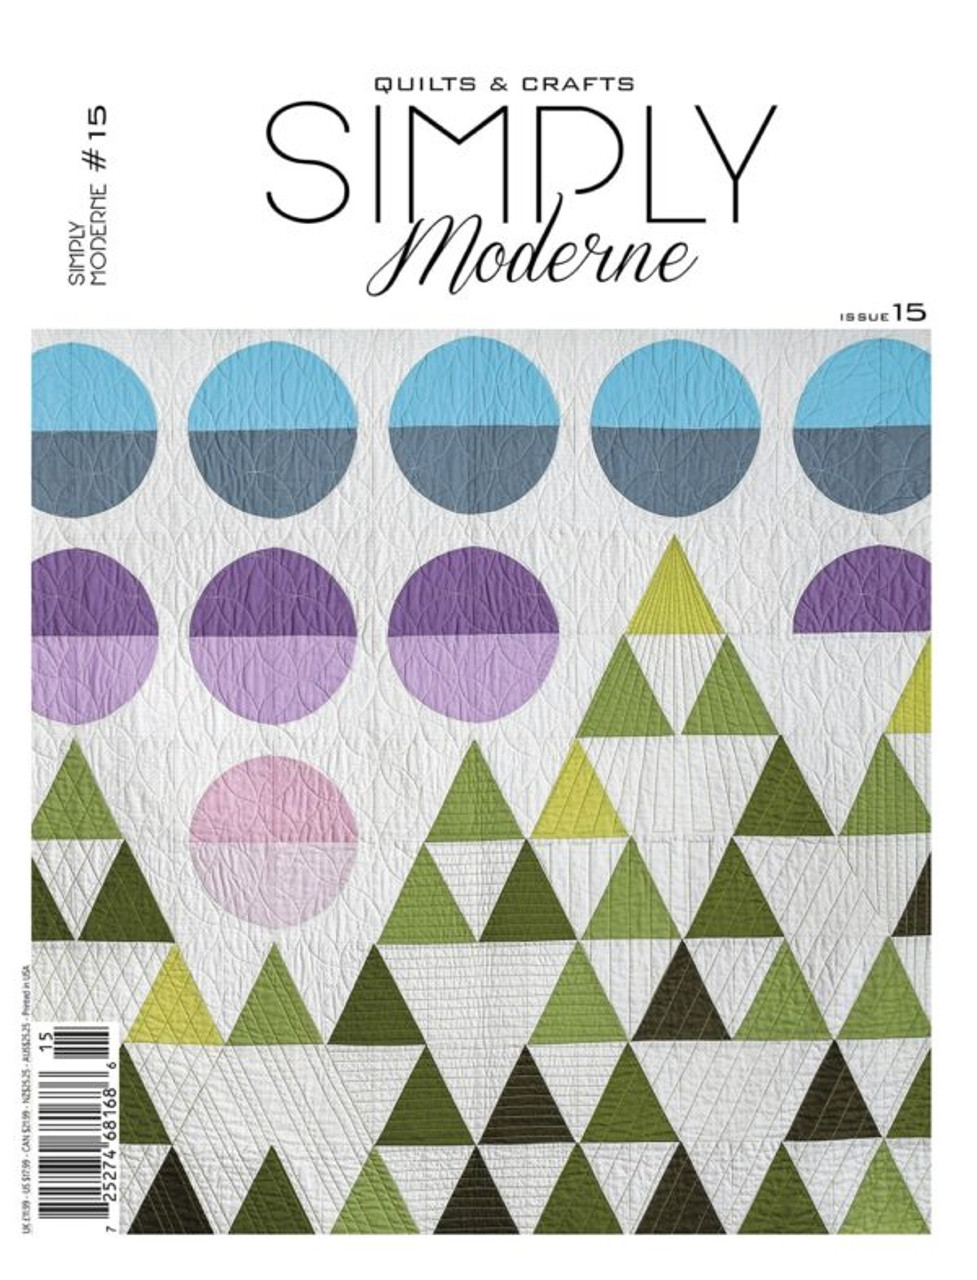 Quiltmania - Simply Moderne No. 15 - LAST ONE